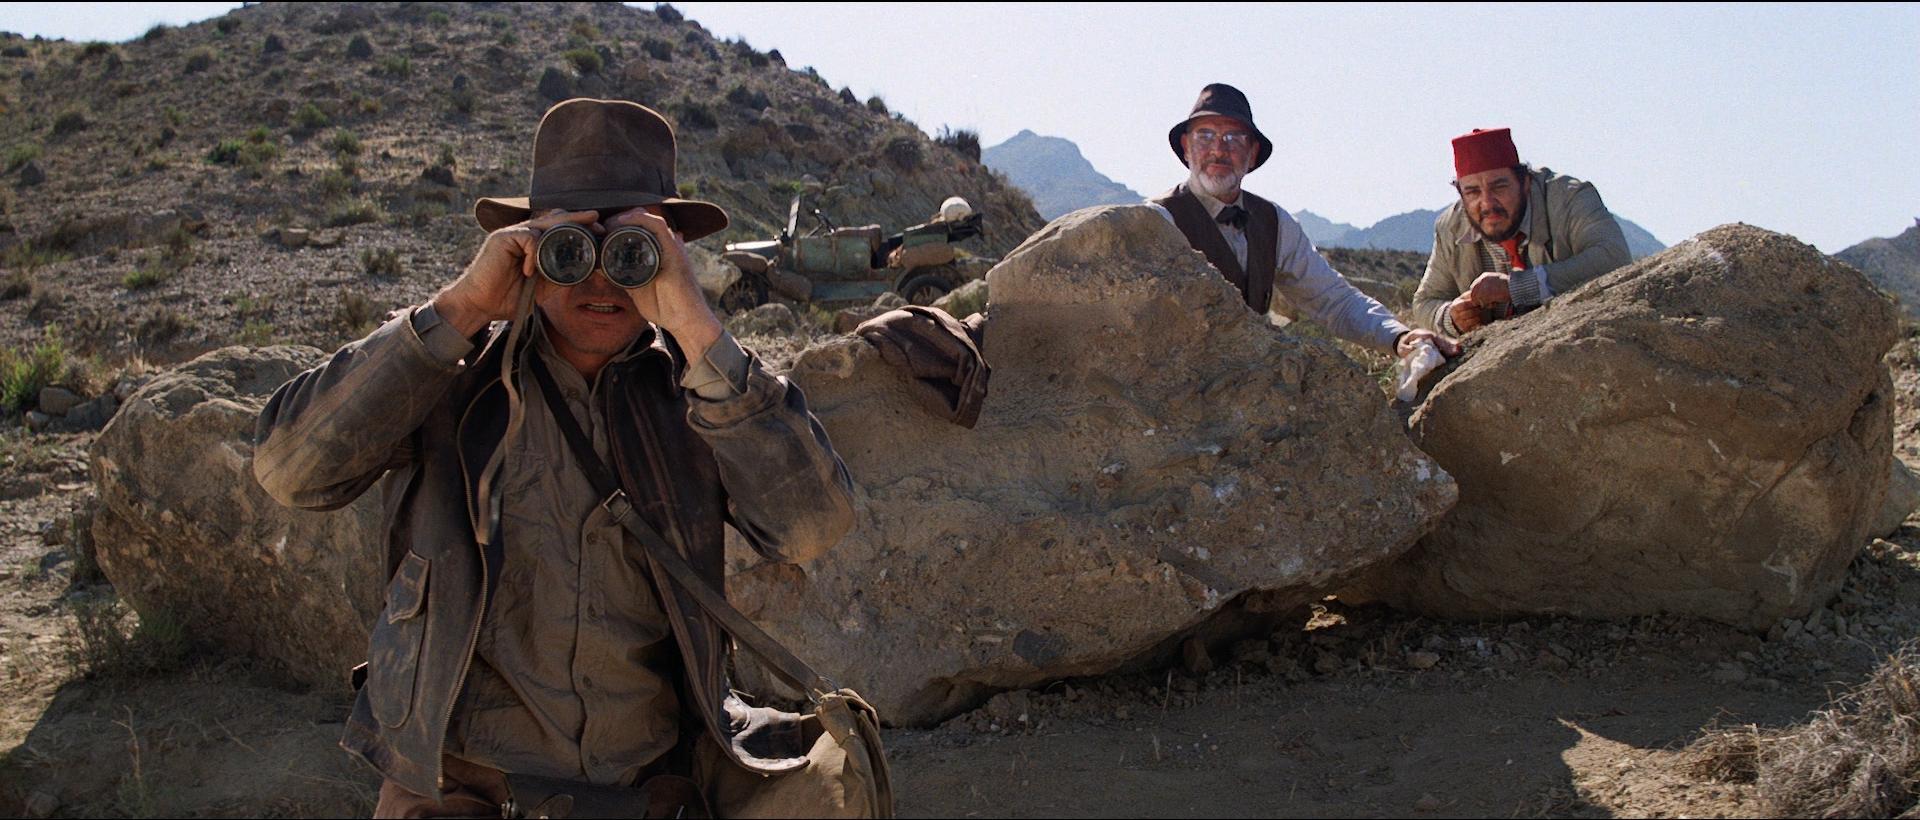 Image gallery for Indiana Jones and the Last Crusade - FilmAffinity